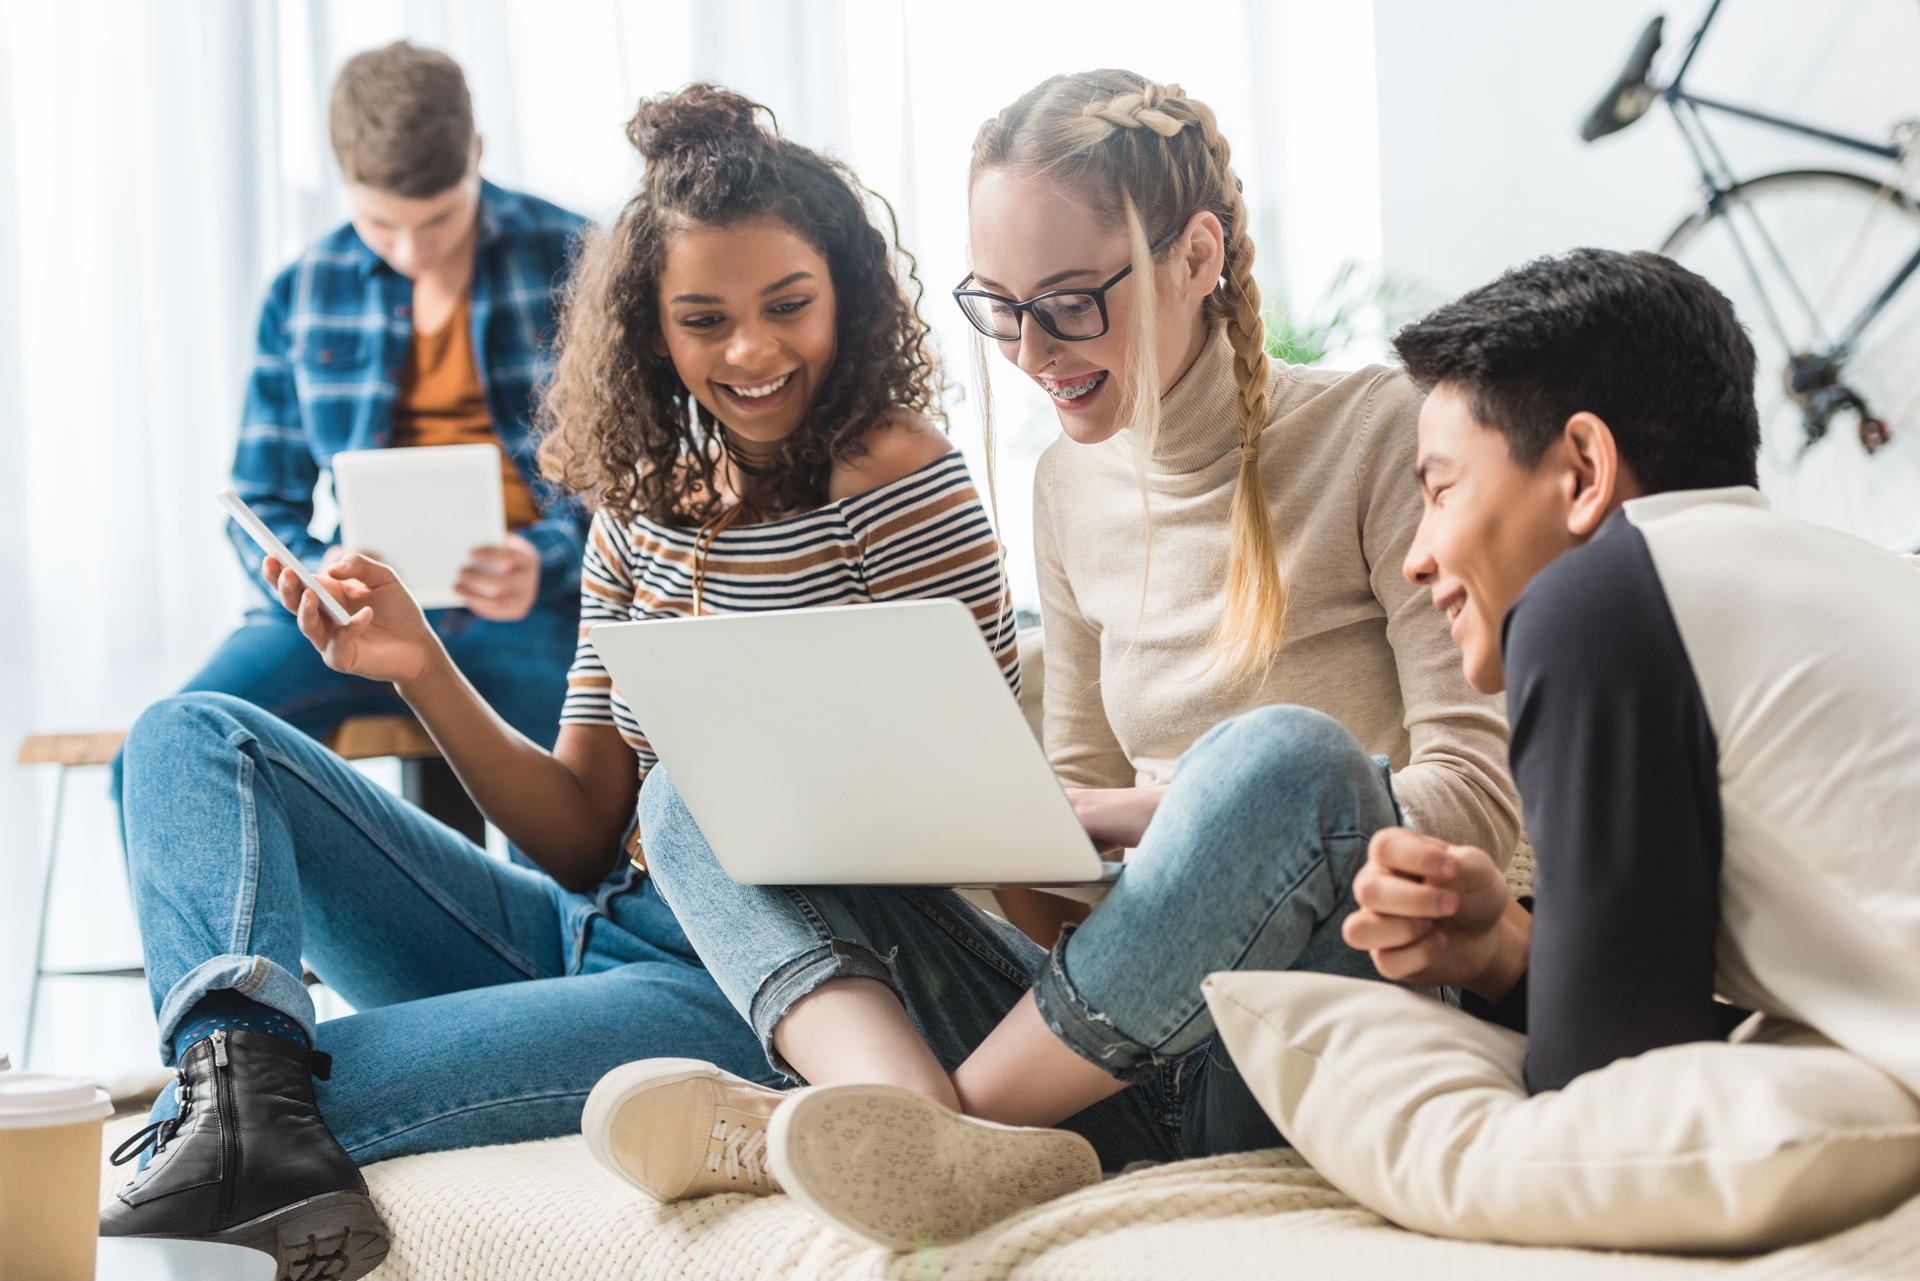 happy multicultural teens looking at laptop and sitting on sofa; Shutterstock ID 772791274; purchase_order: -; job: -; client: -; other: -